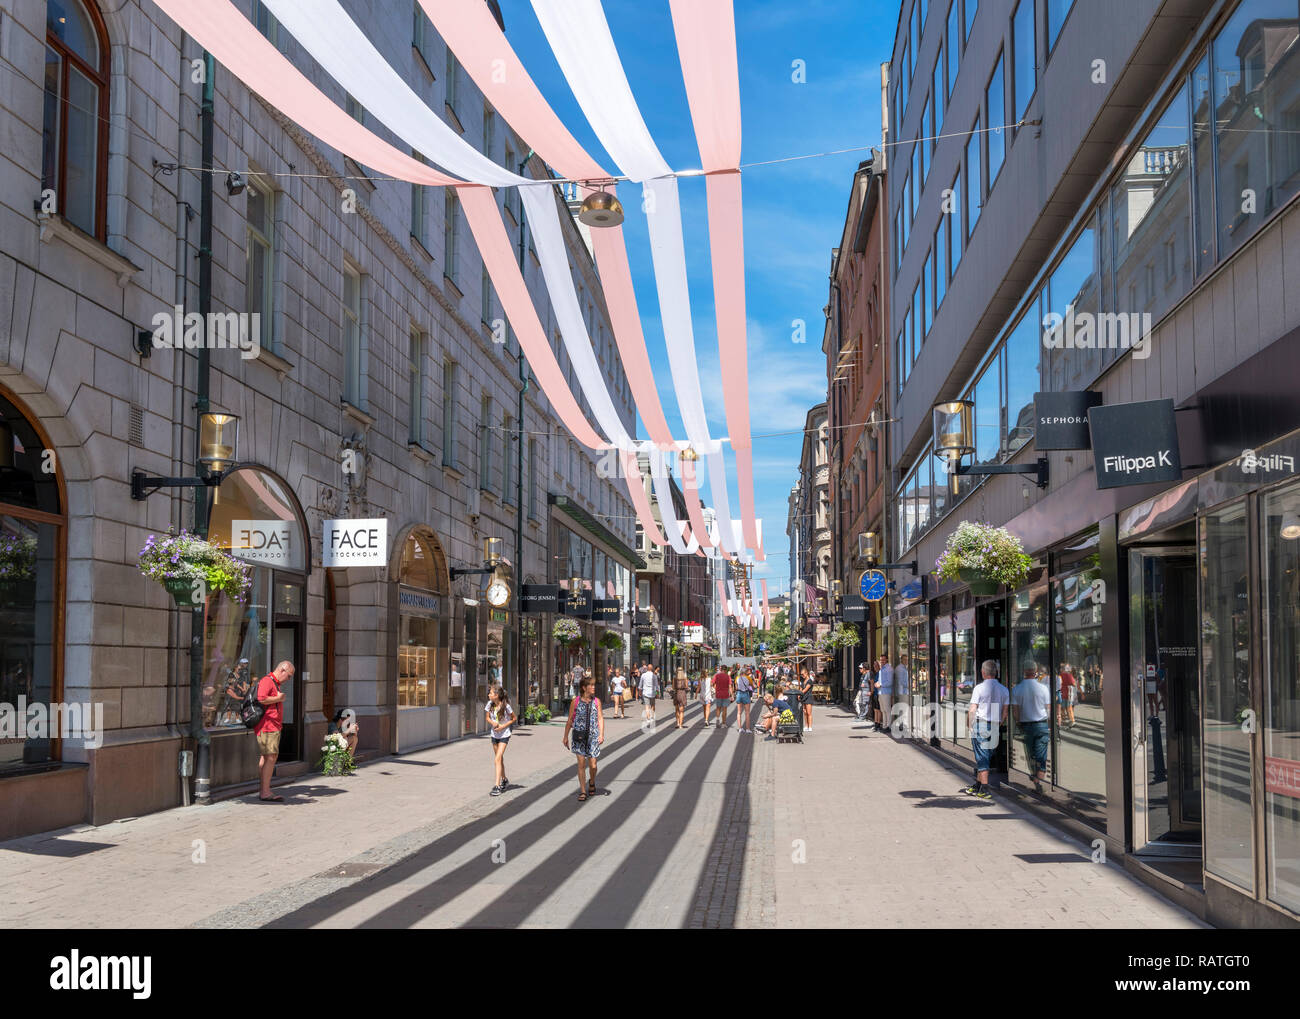 Shops and stores on Biblioteksgatan, a major shopping street in city Norrmalm, Stockholm, Sweden Stock Photo Alamy